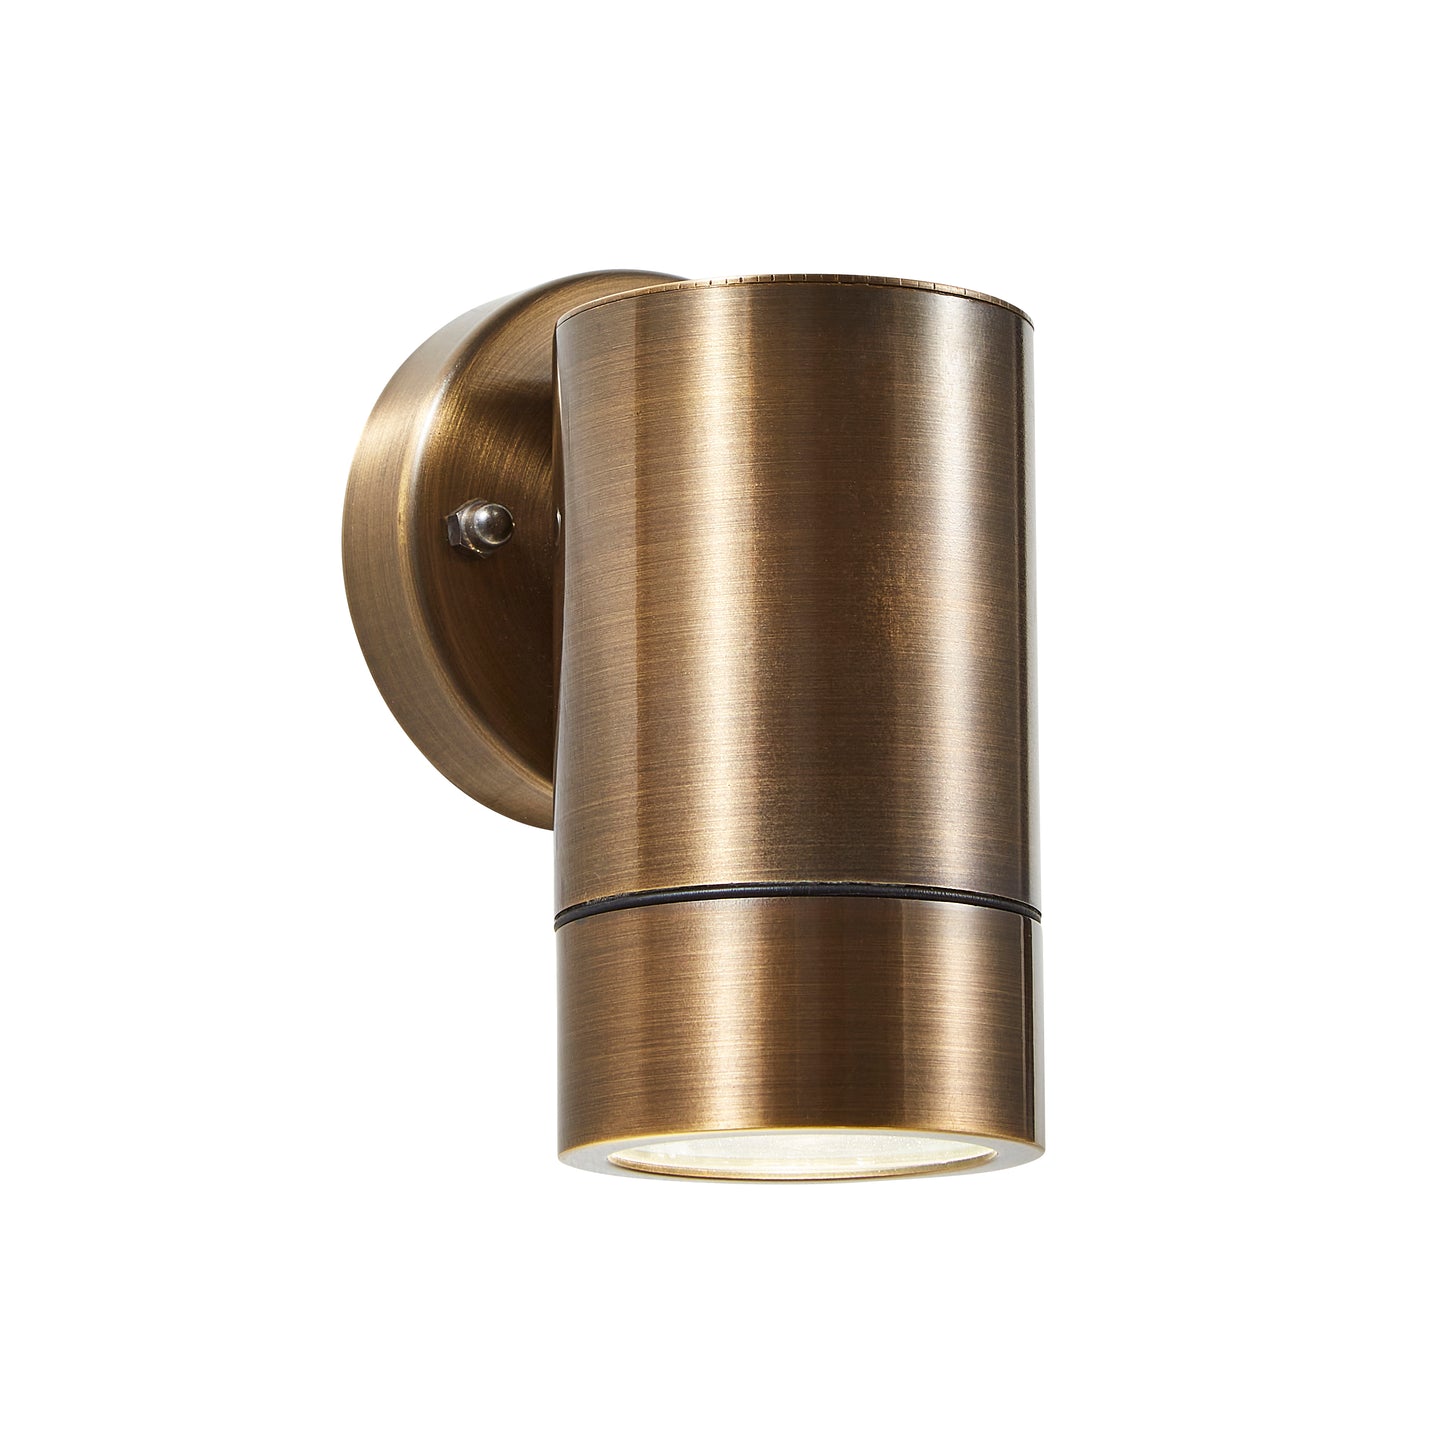 Our Liam bronze outdoor wall mounted single cylinder outdoor light would look perfect in a modern or more traditional home design. Outside wall lights can provide atmospheric light in your garden, at the front door or on the terrace as well as a great security solution. It is designed for durability and longevity with its robust material producing a fully weatherproof and water-resistant light fitting. Use LED bulbs to make this light energy efficient and low cost to run.